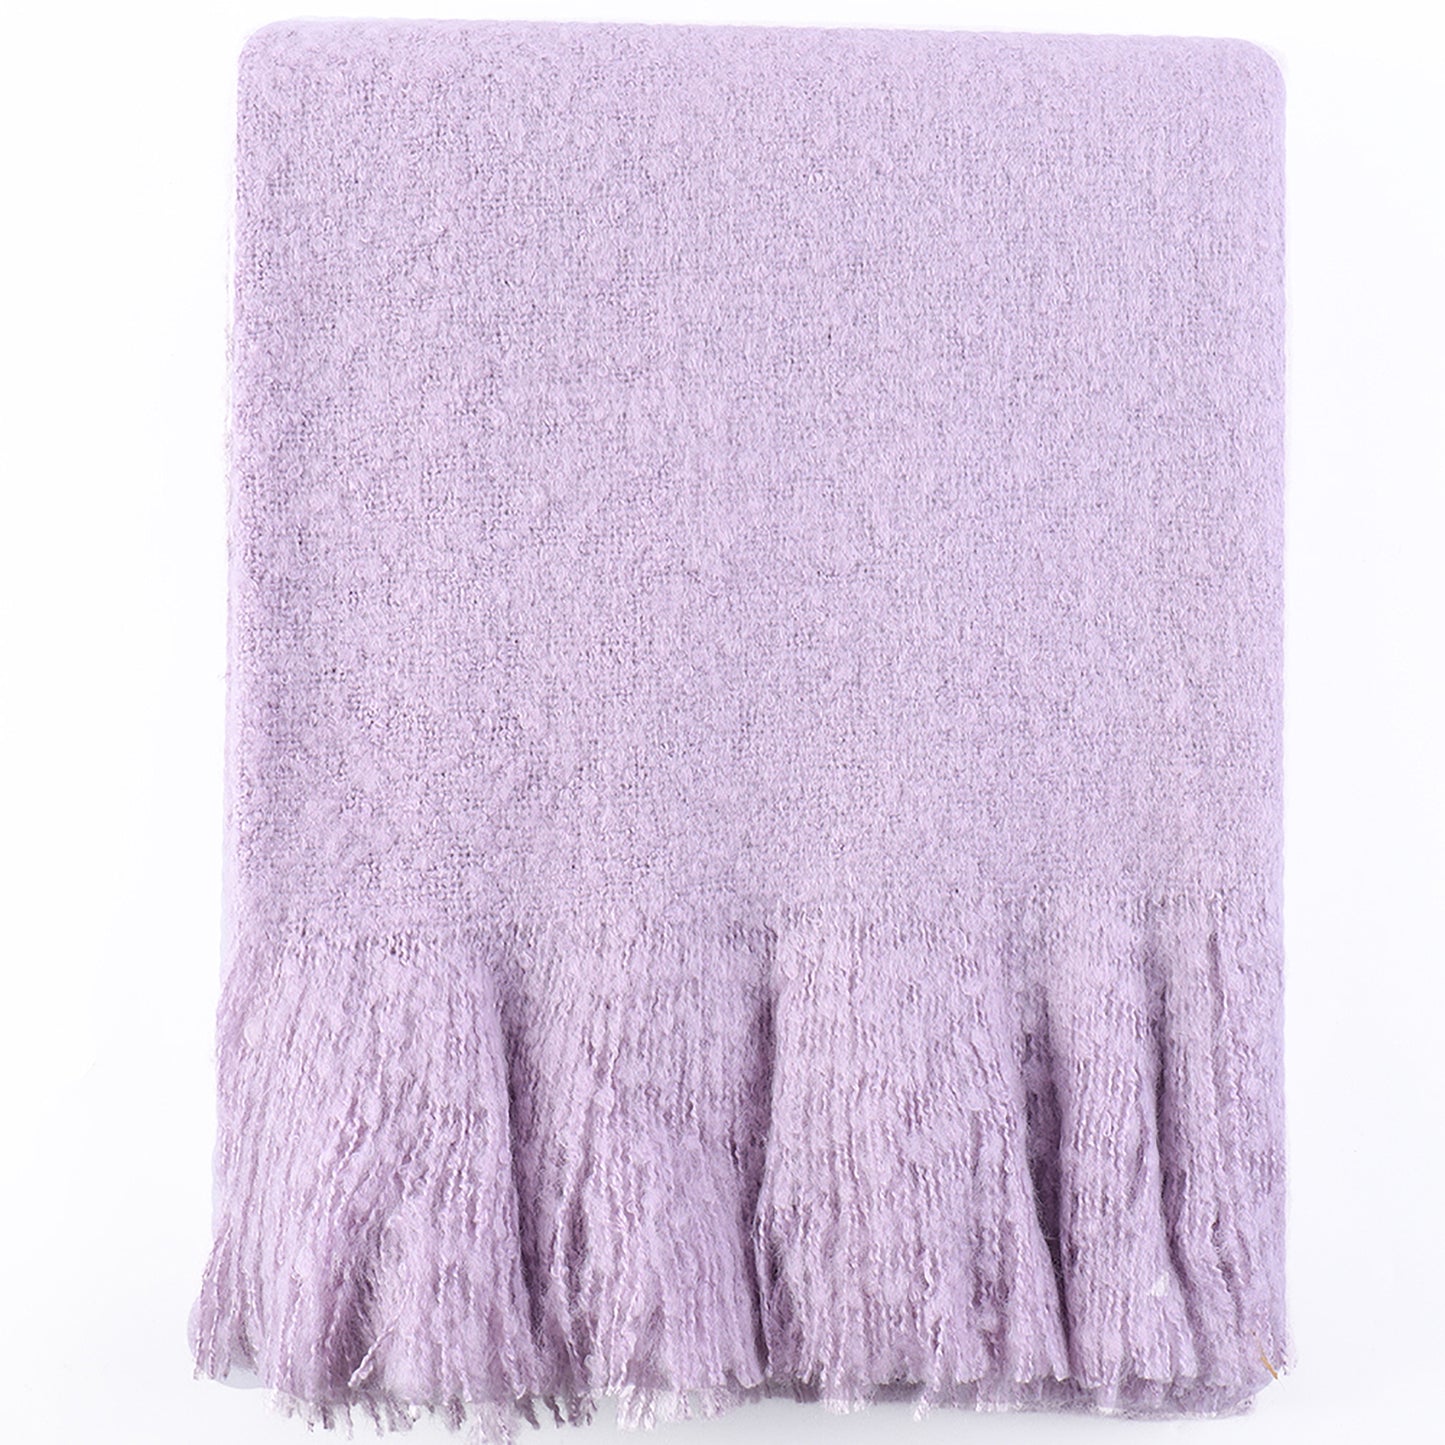 Knitted Throw Blanket Fringe Light Purple Decorative Tassel Decor Couch Bed Sofa Fall Outdoor Woven Textured Soft Lightweight